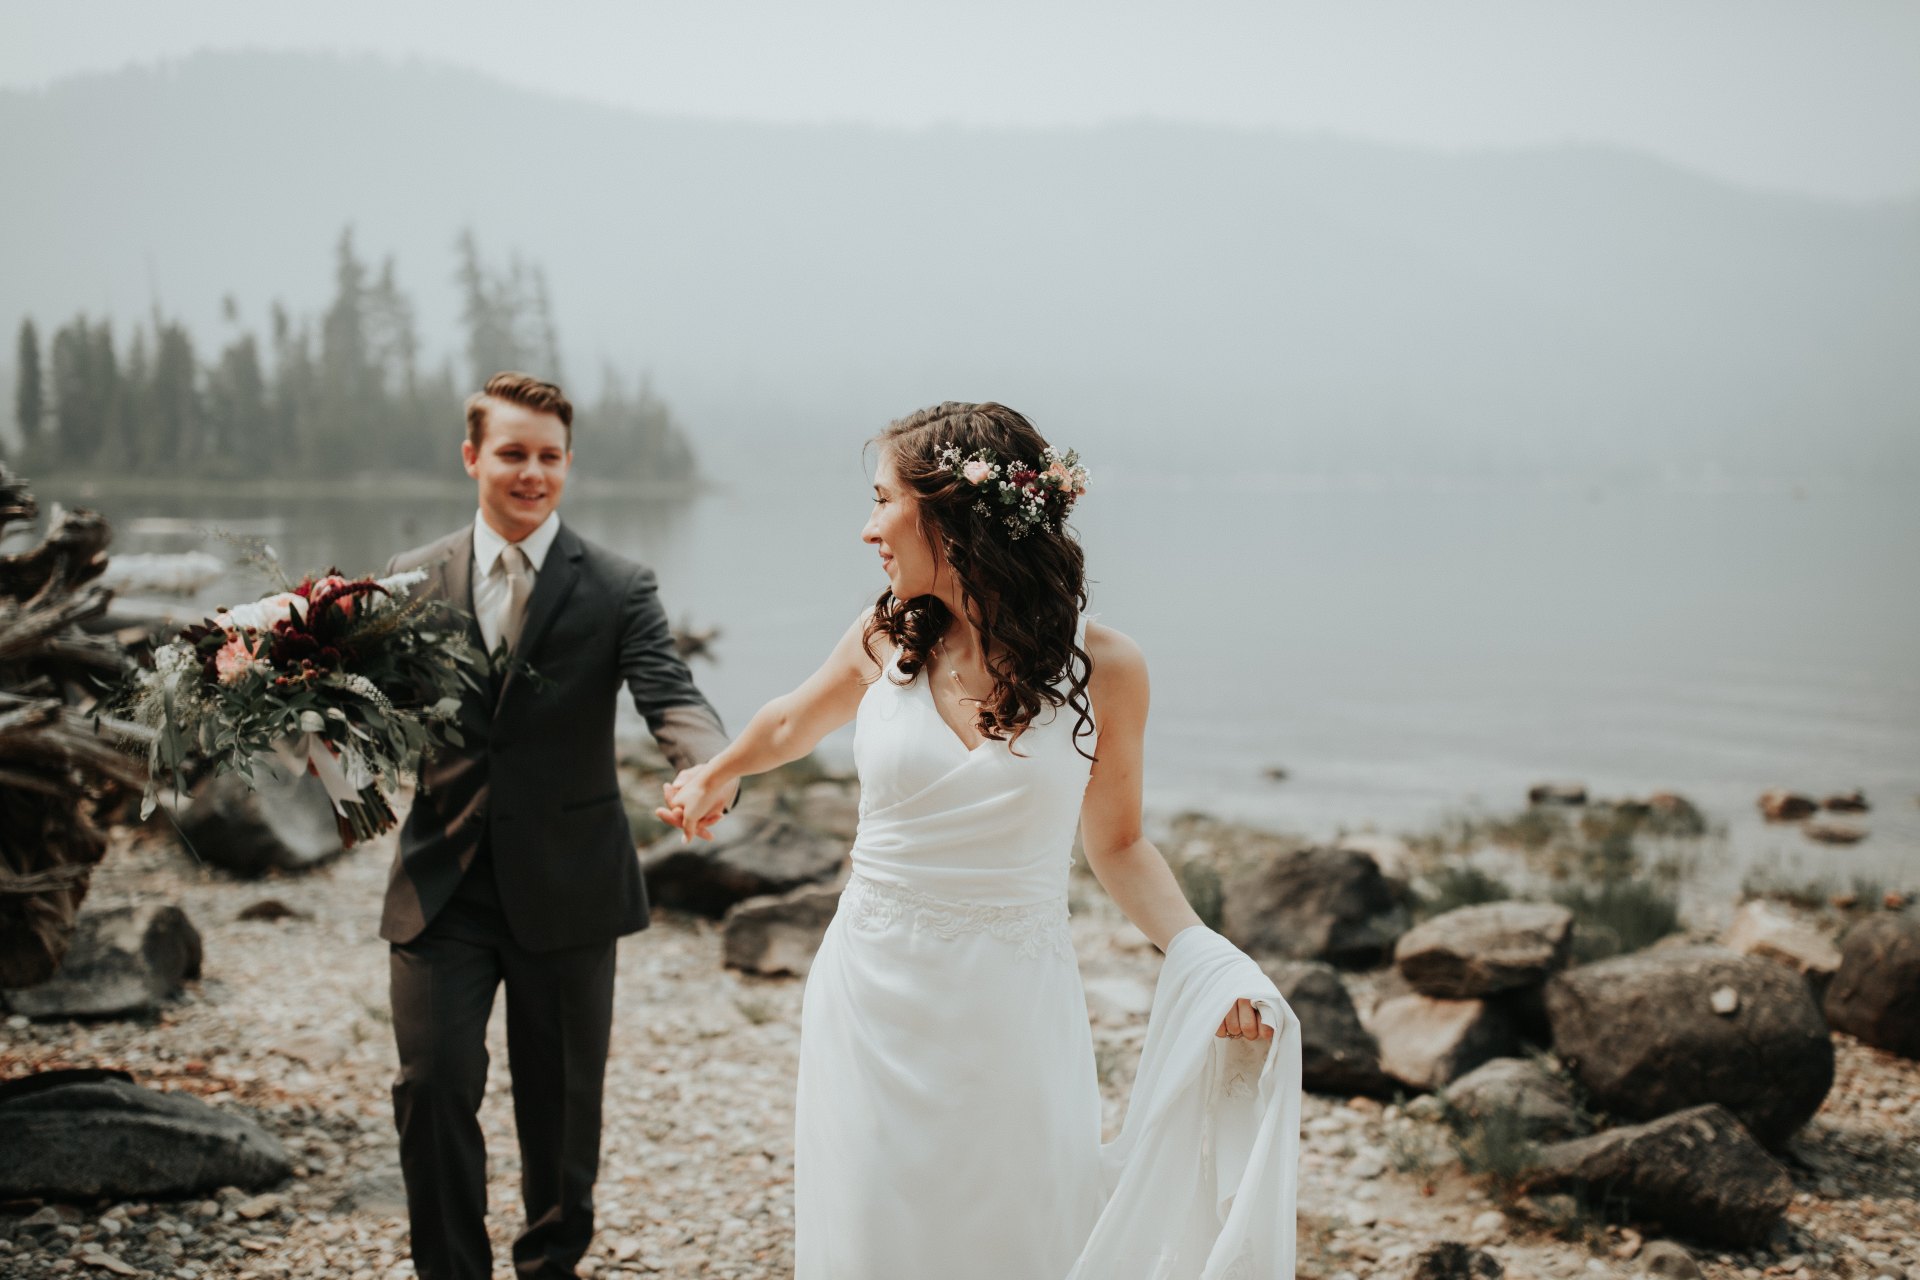 X Ways To Save Money On Your Wedding (So You Have Enough Cash For A Honeymoon)